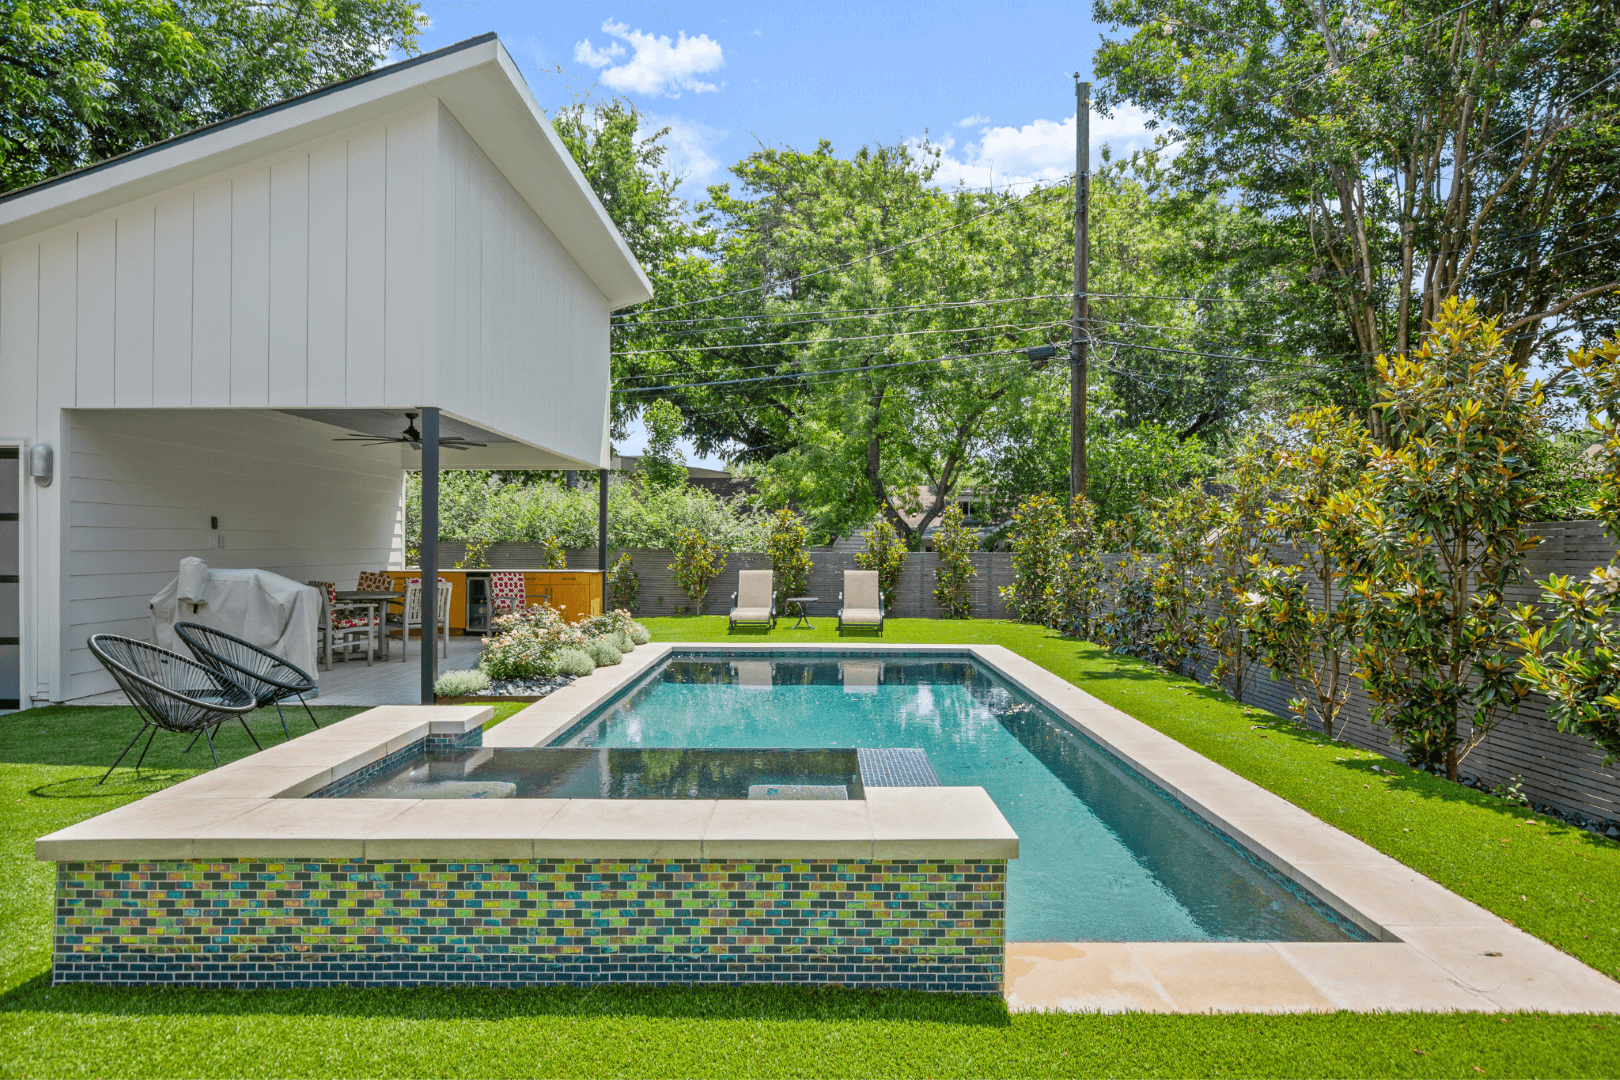 Custom built pool in Austin, Texas. Remodel your backyard and stay cool this summer!